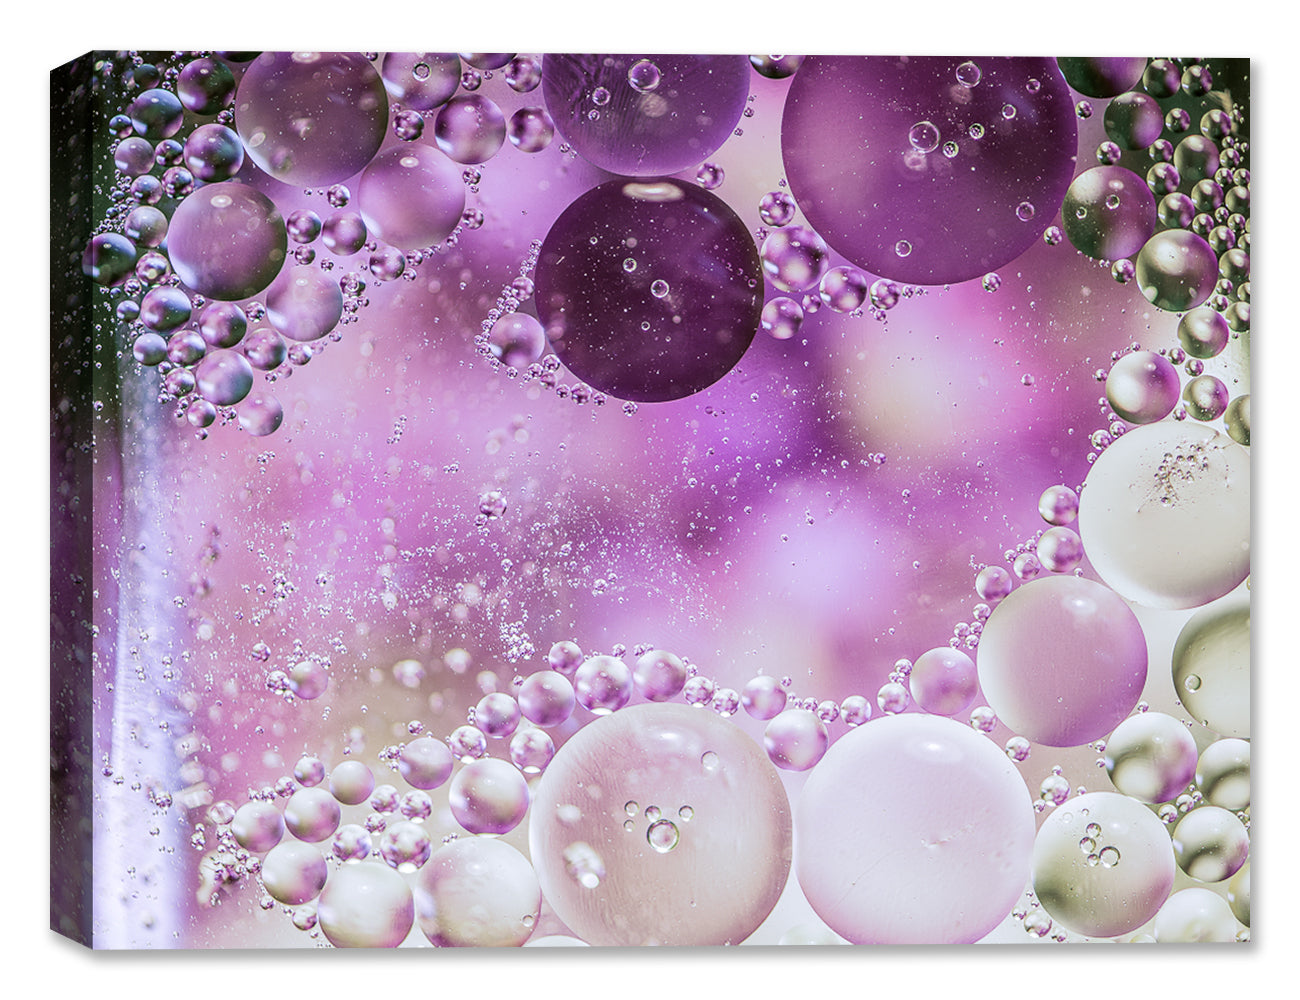 Bubbles No. 17 - Latex on Canvas - Abstract Art